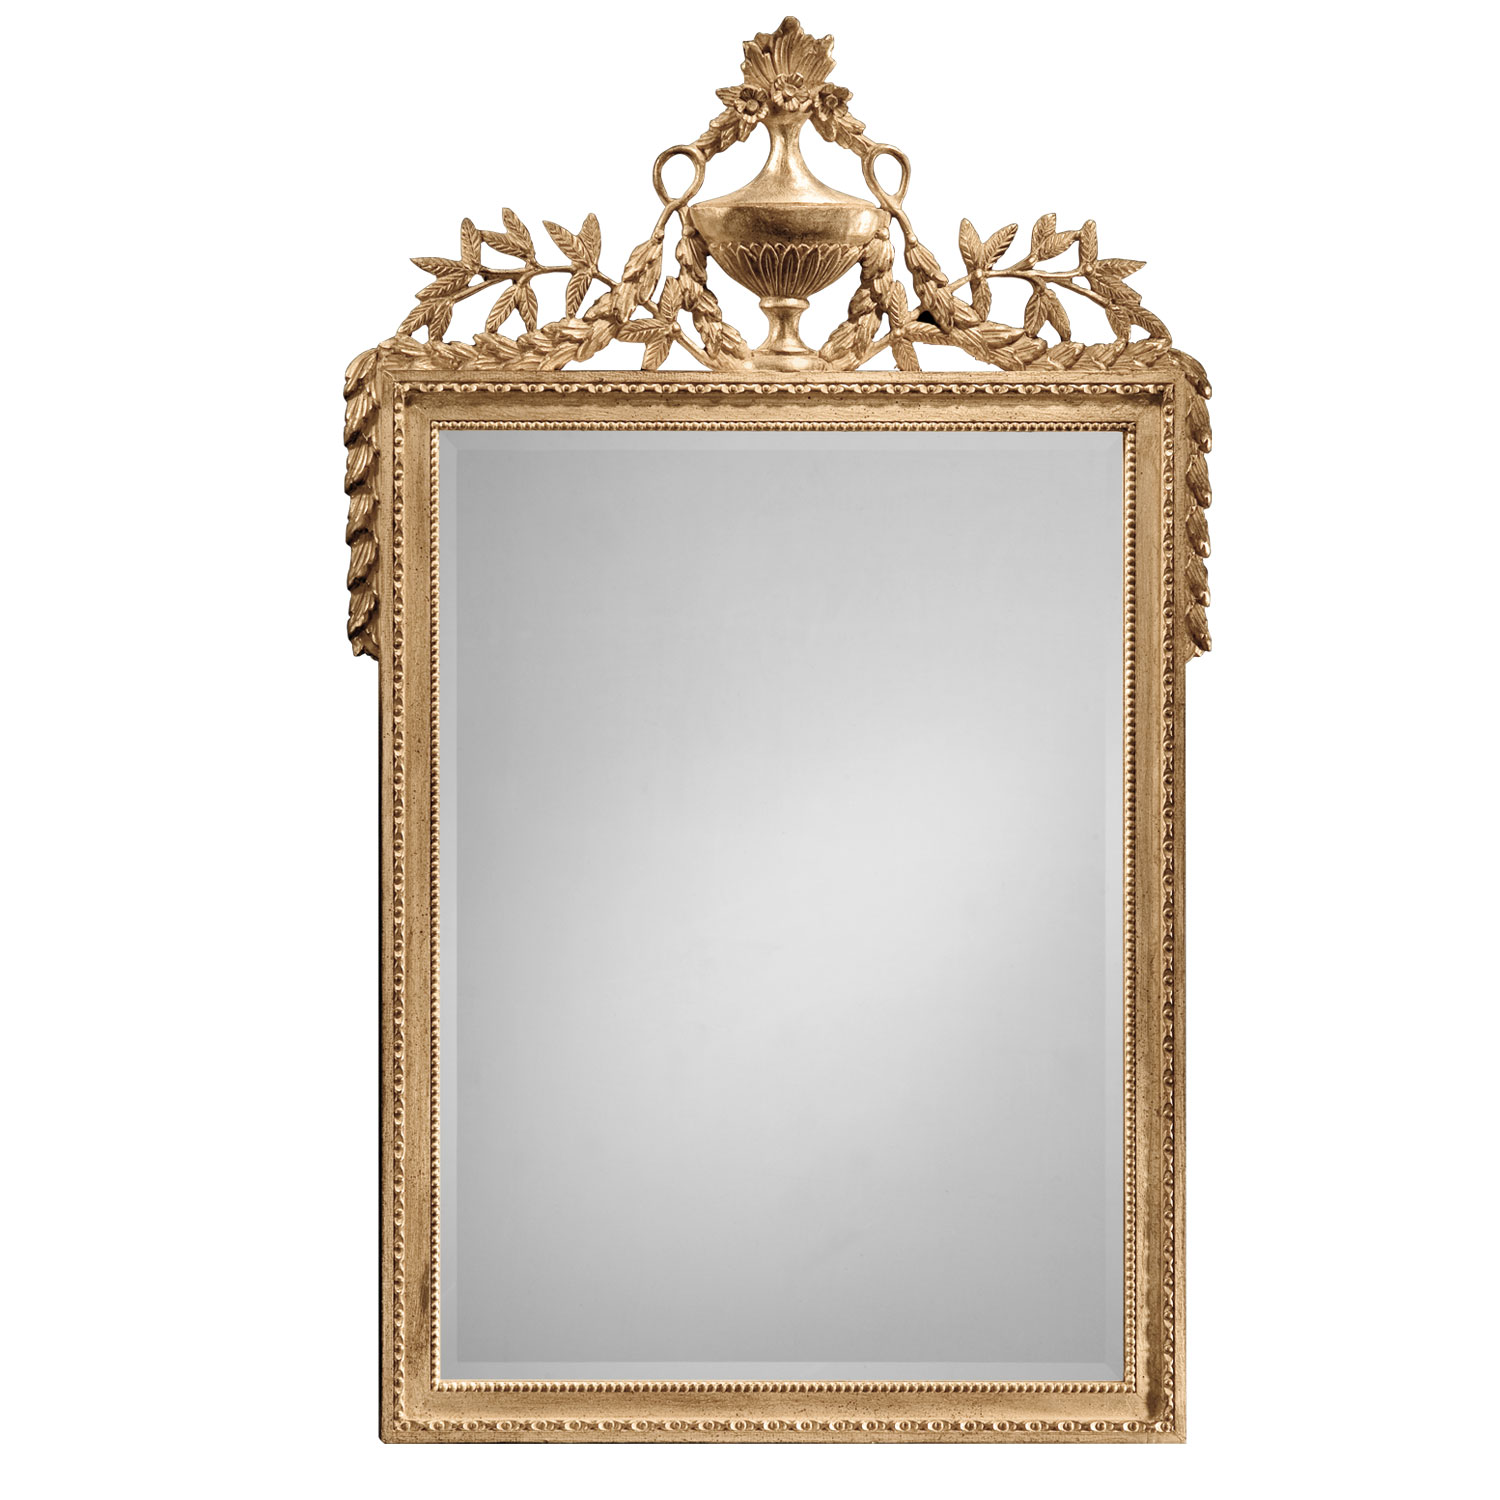 french wall mirror with bow detail, gold metal leaf